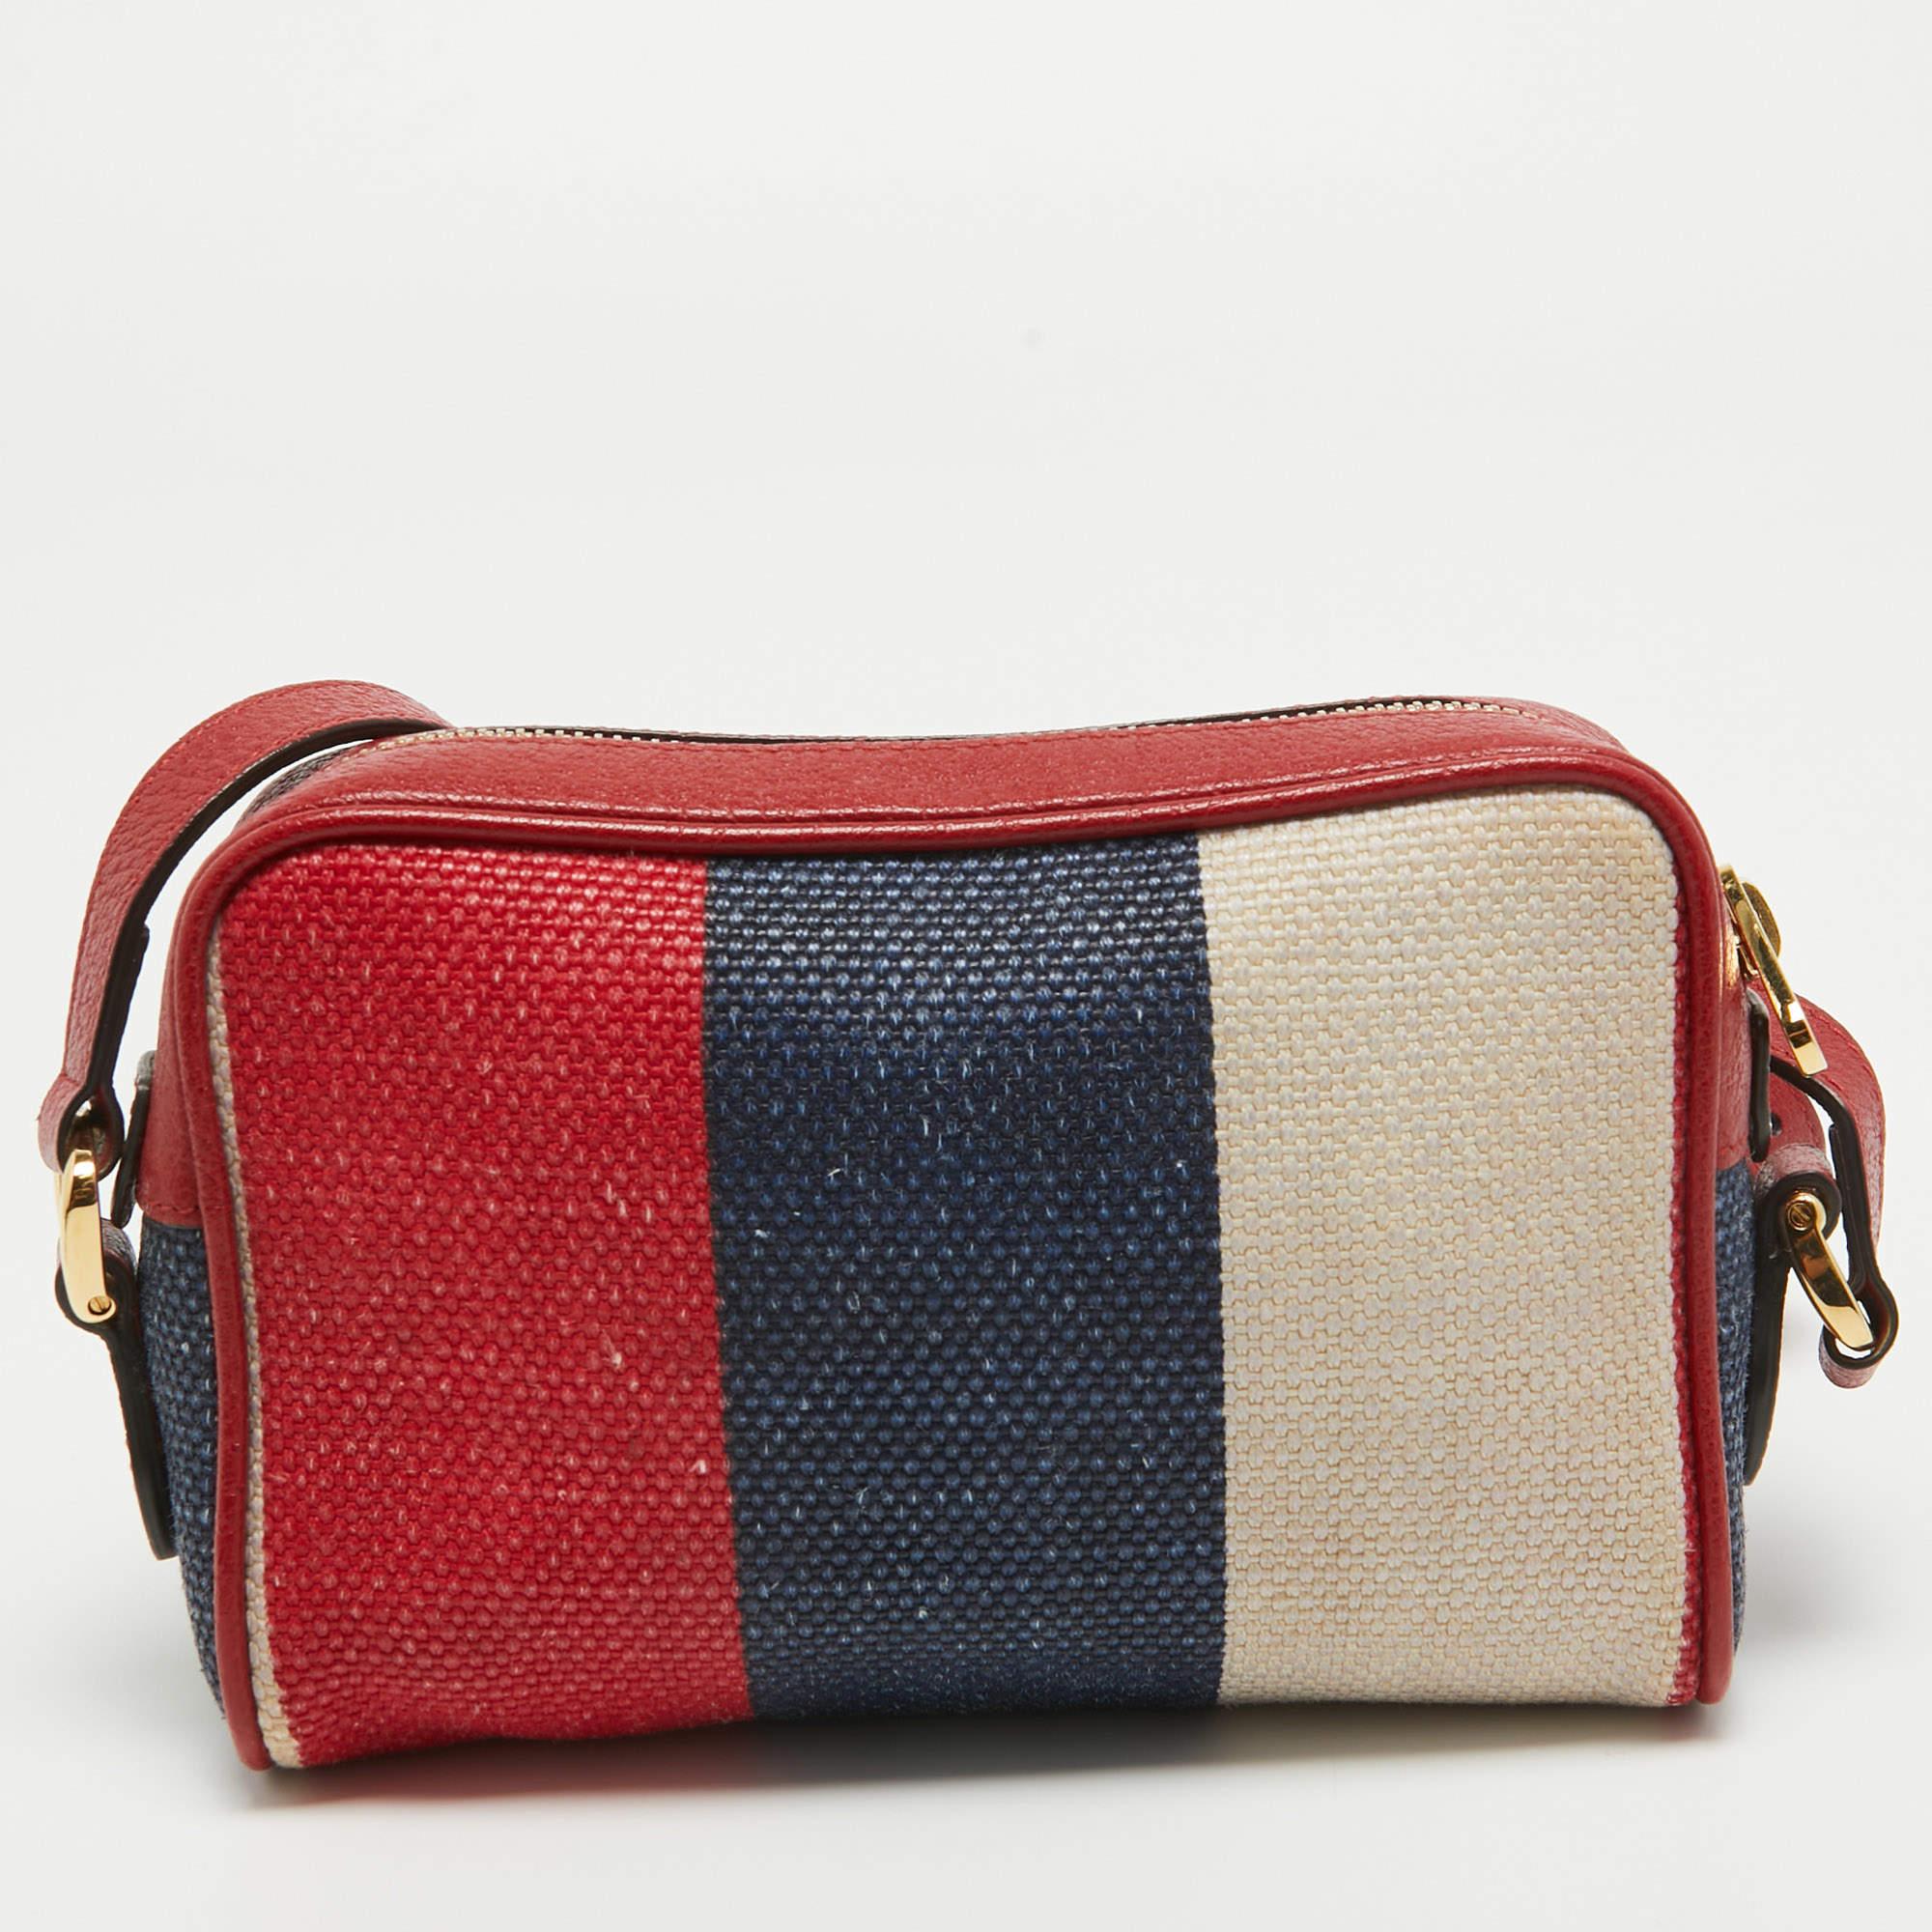 Express your personal style with this high-end crossbody bag. Crafted from quality materials, it has been added with fine details and is finished perfectly. It features a well-sized interior.

